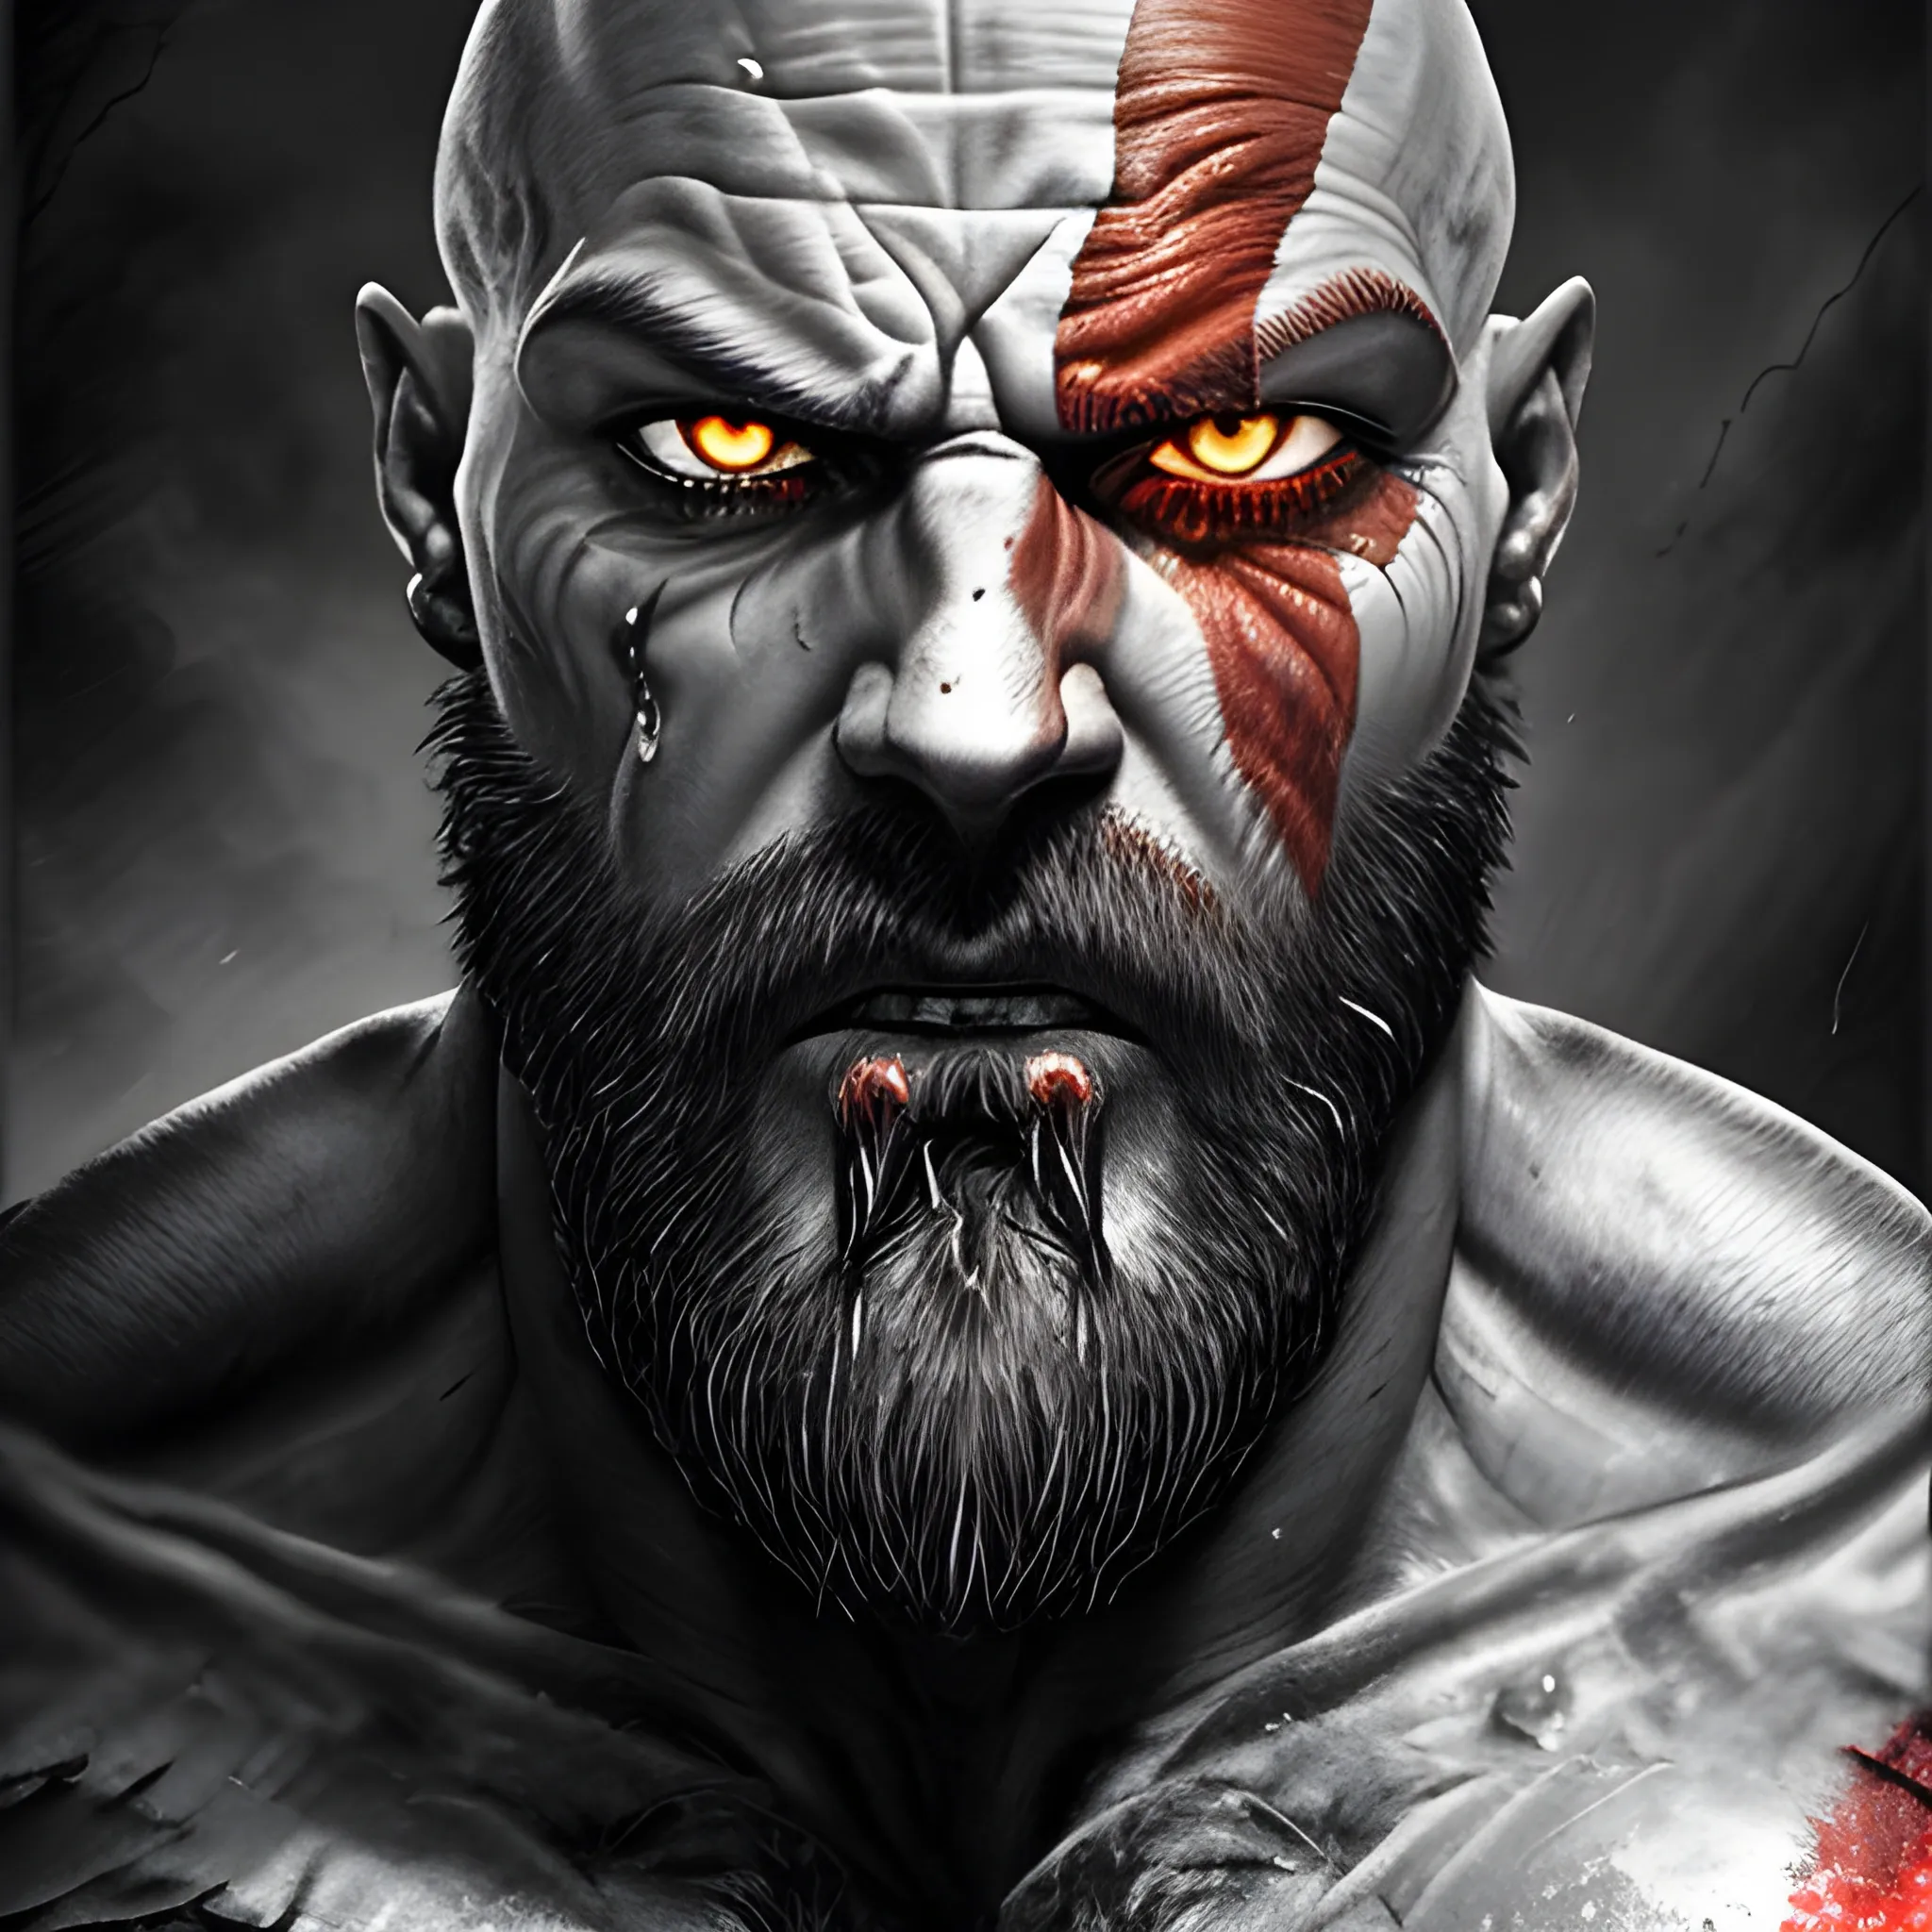 In this intense close-up, Kratos, the Spartan warrior, bears the unmistakable marks of unbridled anger. His battle-hardened face is etched with scars and a furrowed brow that cast a formidable shadow over his piercing, wrathful eyes. Veins pulse beneath his skin as his clenched jaw reveals the resolve within. Sweat and dirt streak his weathered skin, mirroring the toll of countless battles. The fiery backdrop mirrors the tumultuous storm within him. Kratos' visage, a portrait of rage, resonates with the relentless pursuit of vengeance, creating a gripping image of primal fury., Trippy, Pencil Sketch